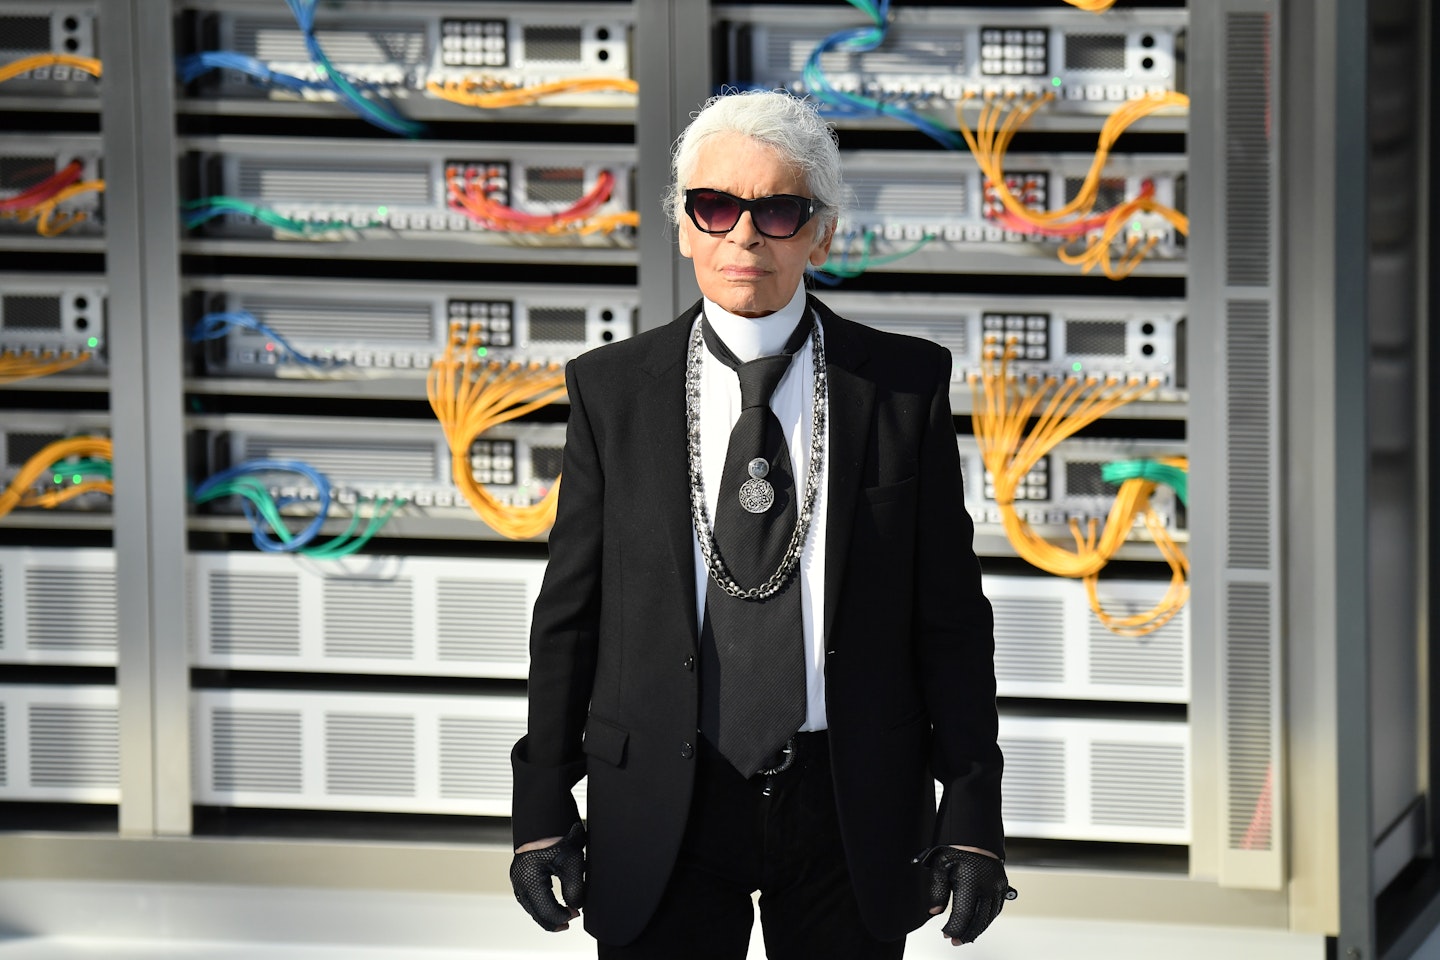 The history of the House of CHANEL